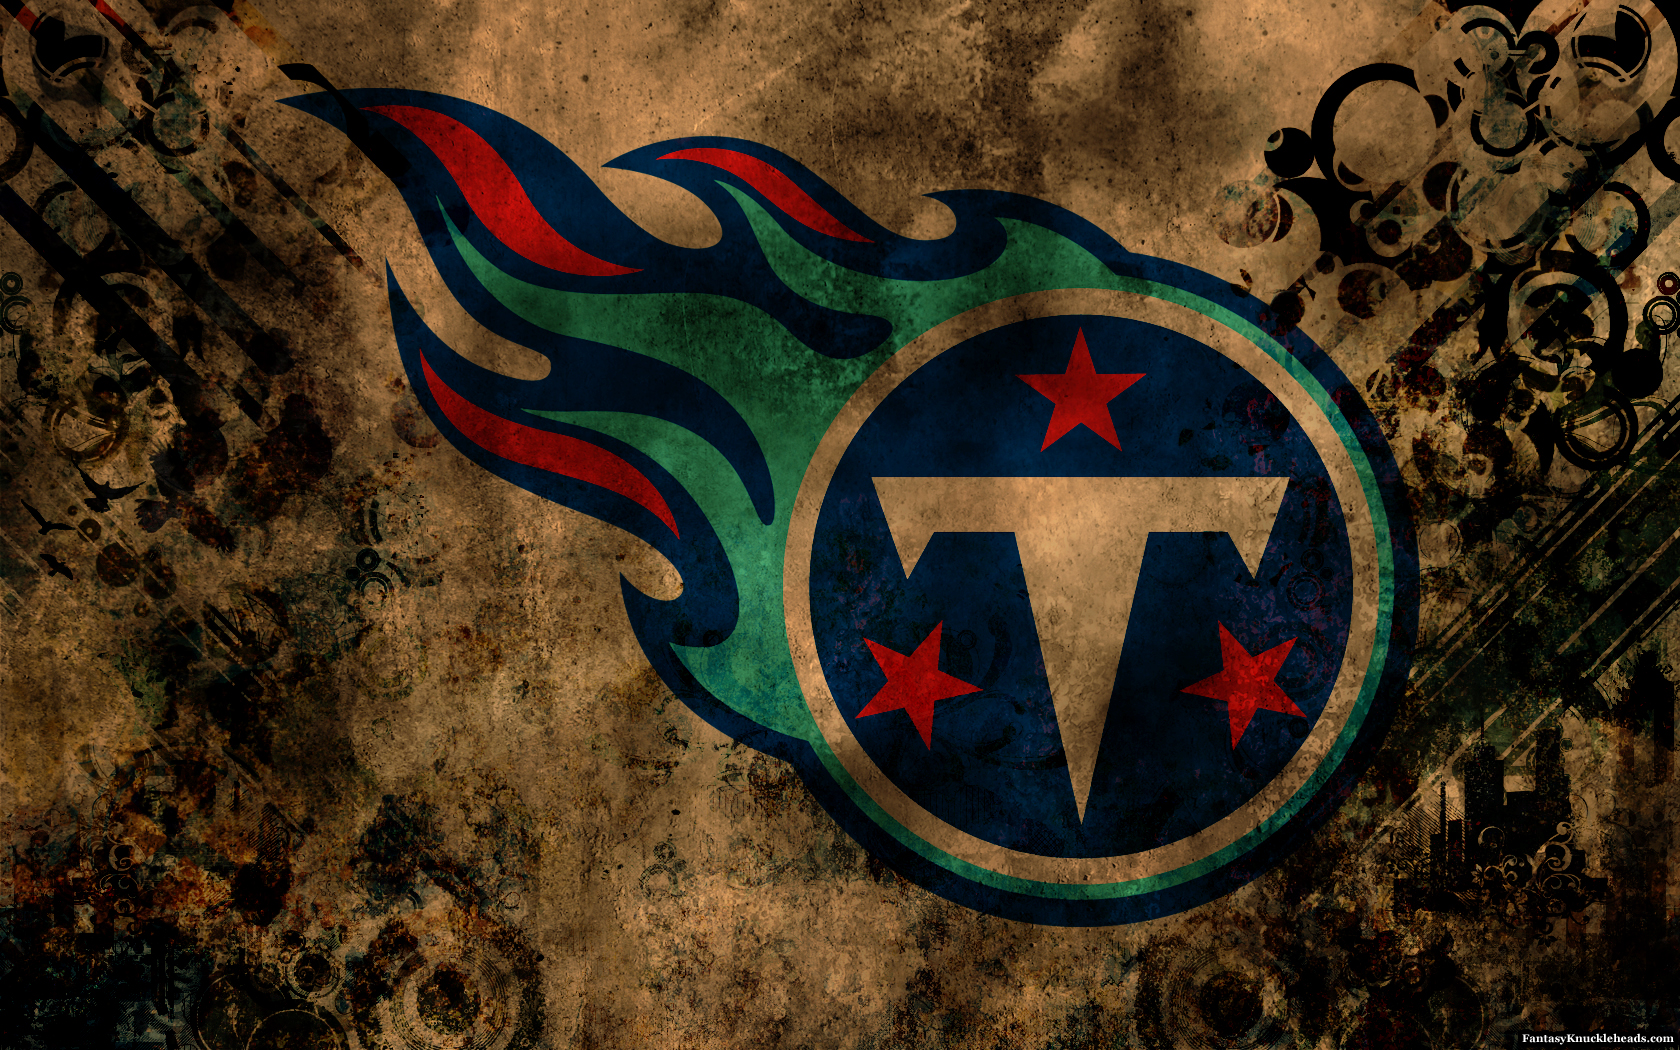 Related Image To Tennessee Titans Football Stadium